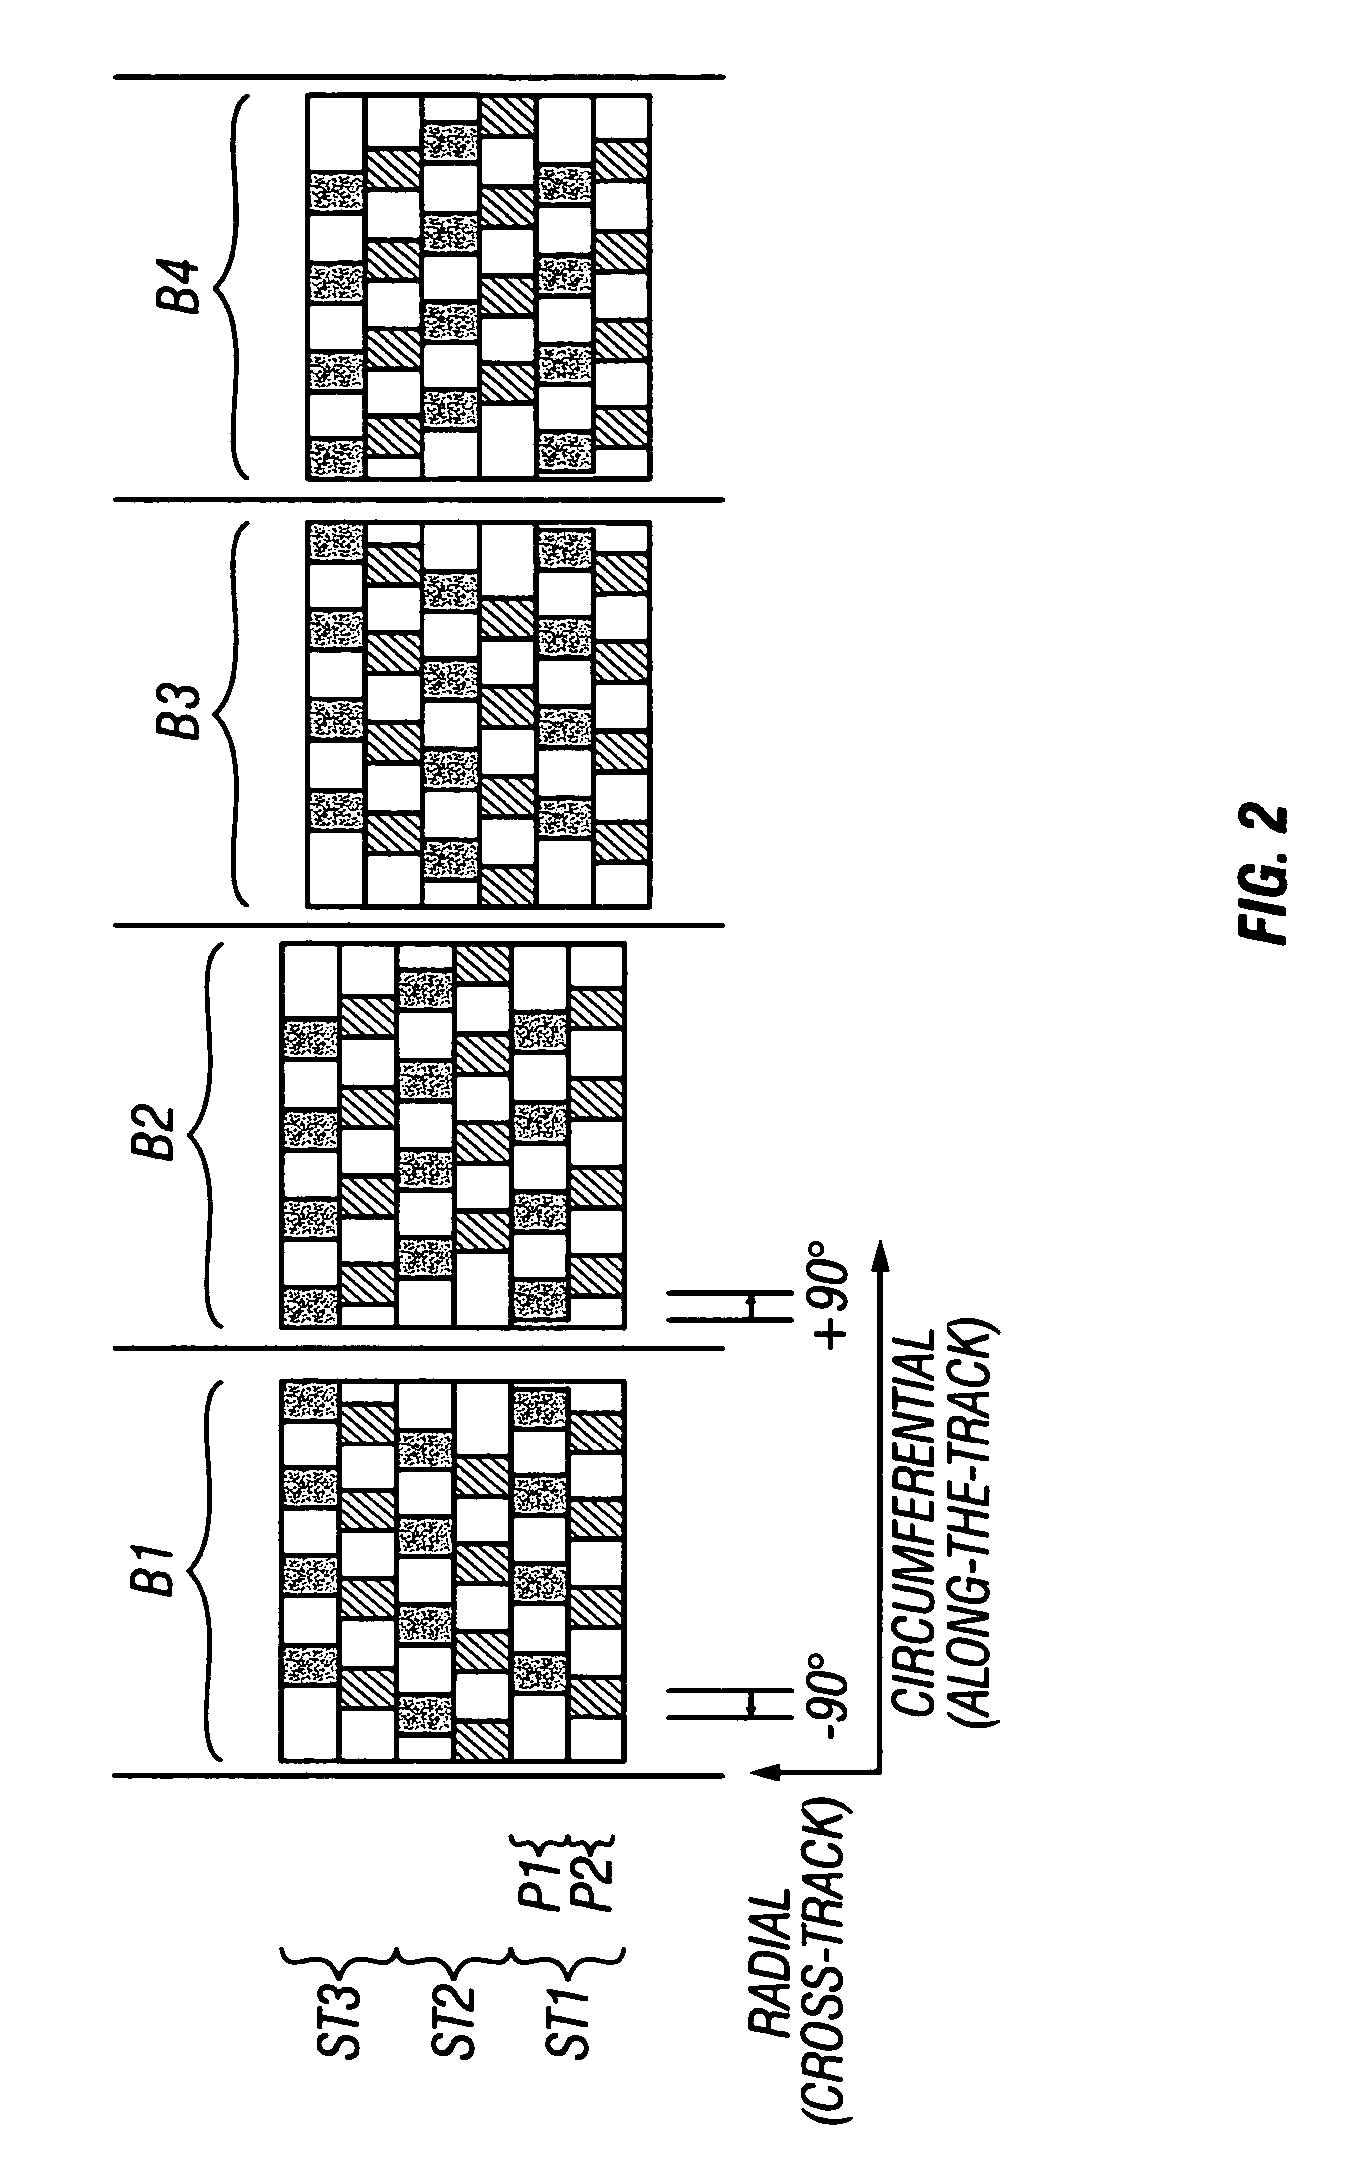 Disk drive with phase-quadrature servo pattern and demodulated position error signal insensitive to timing and phase-misalignment errors